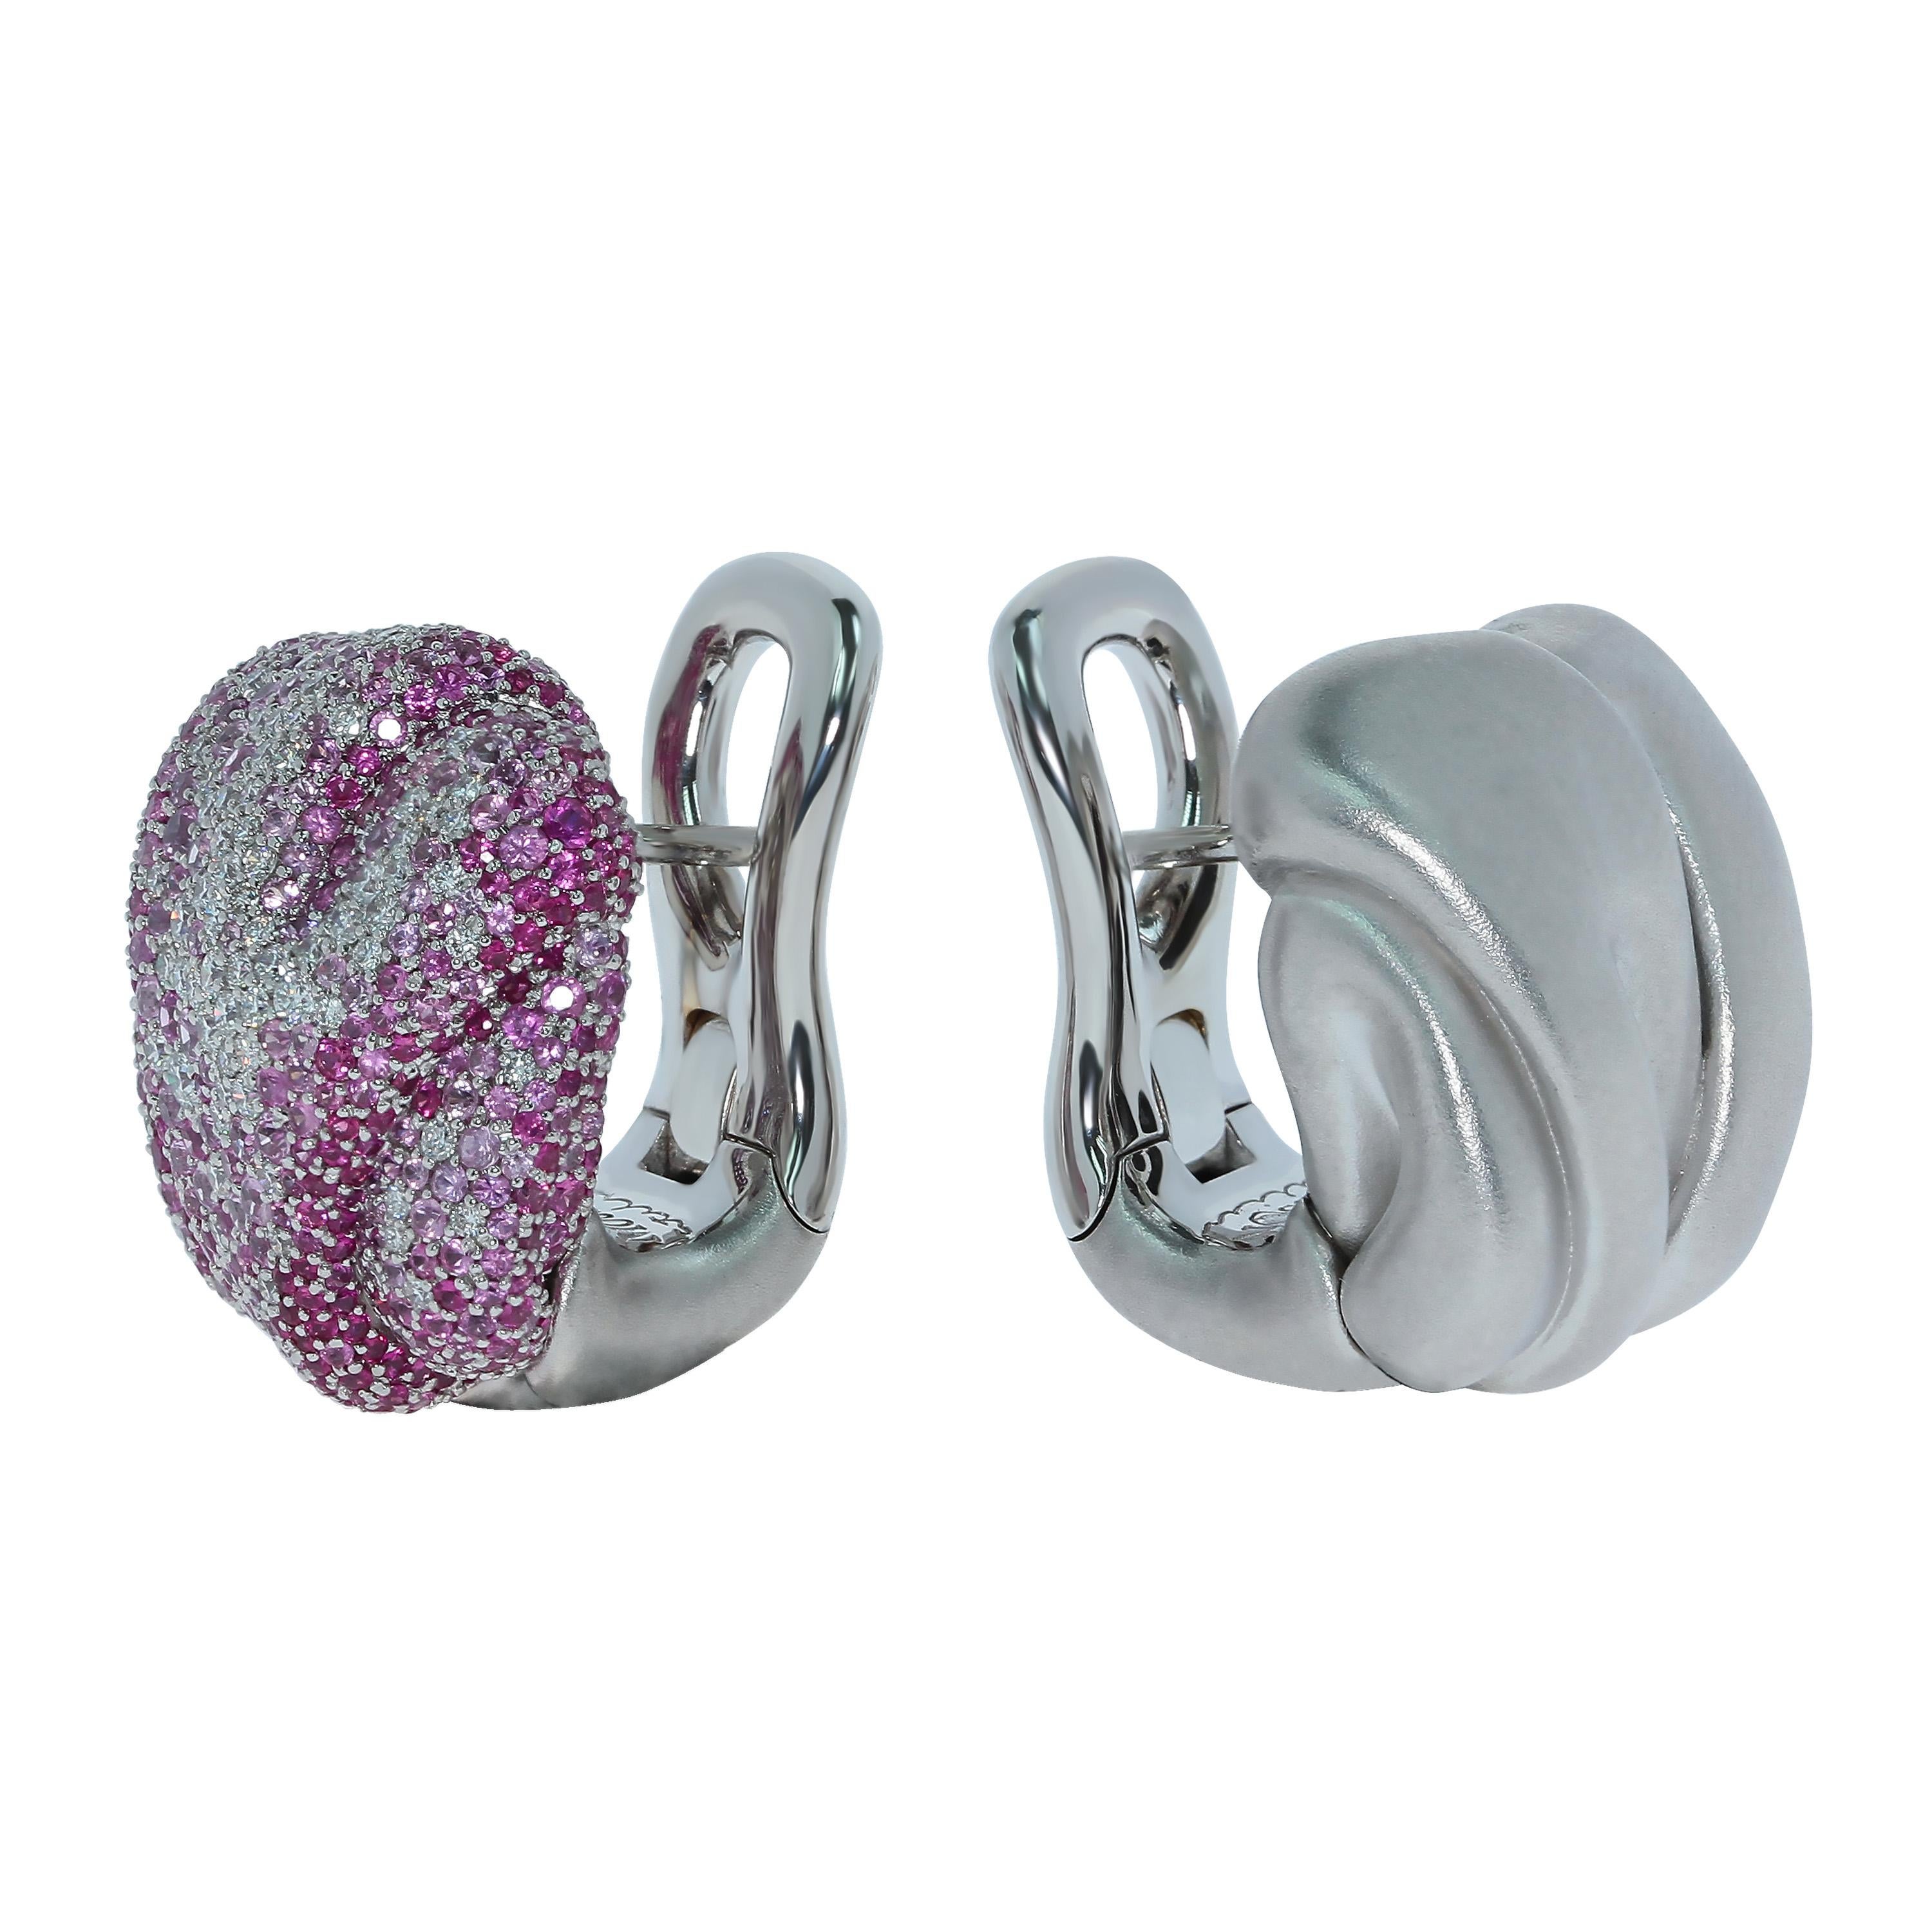 Pink Sapphires Diamonds 18 Karat White Gold Earrings
Our collection is full of different textures and patterns. This time we decided to depict just a piece of crumpled fabric in the Earrings. One Earring is made of 18 Karat Matte White Gold, another